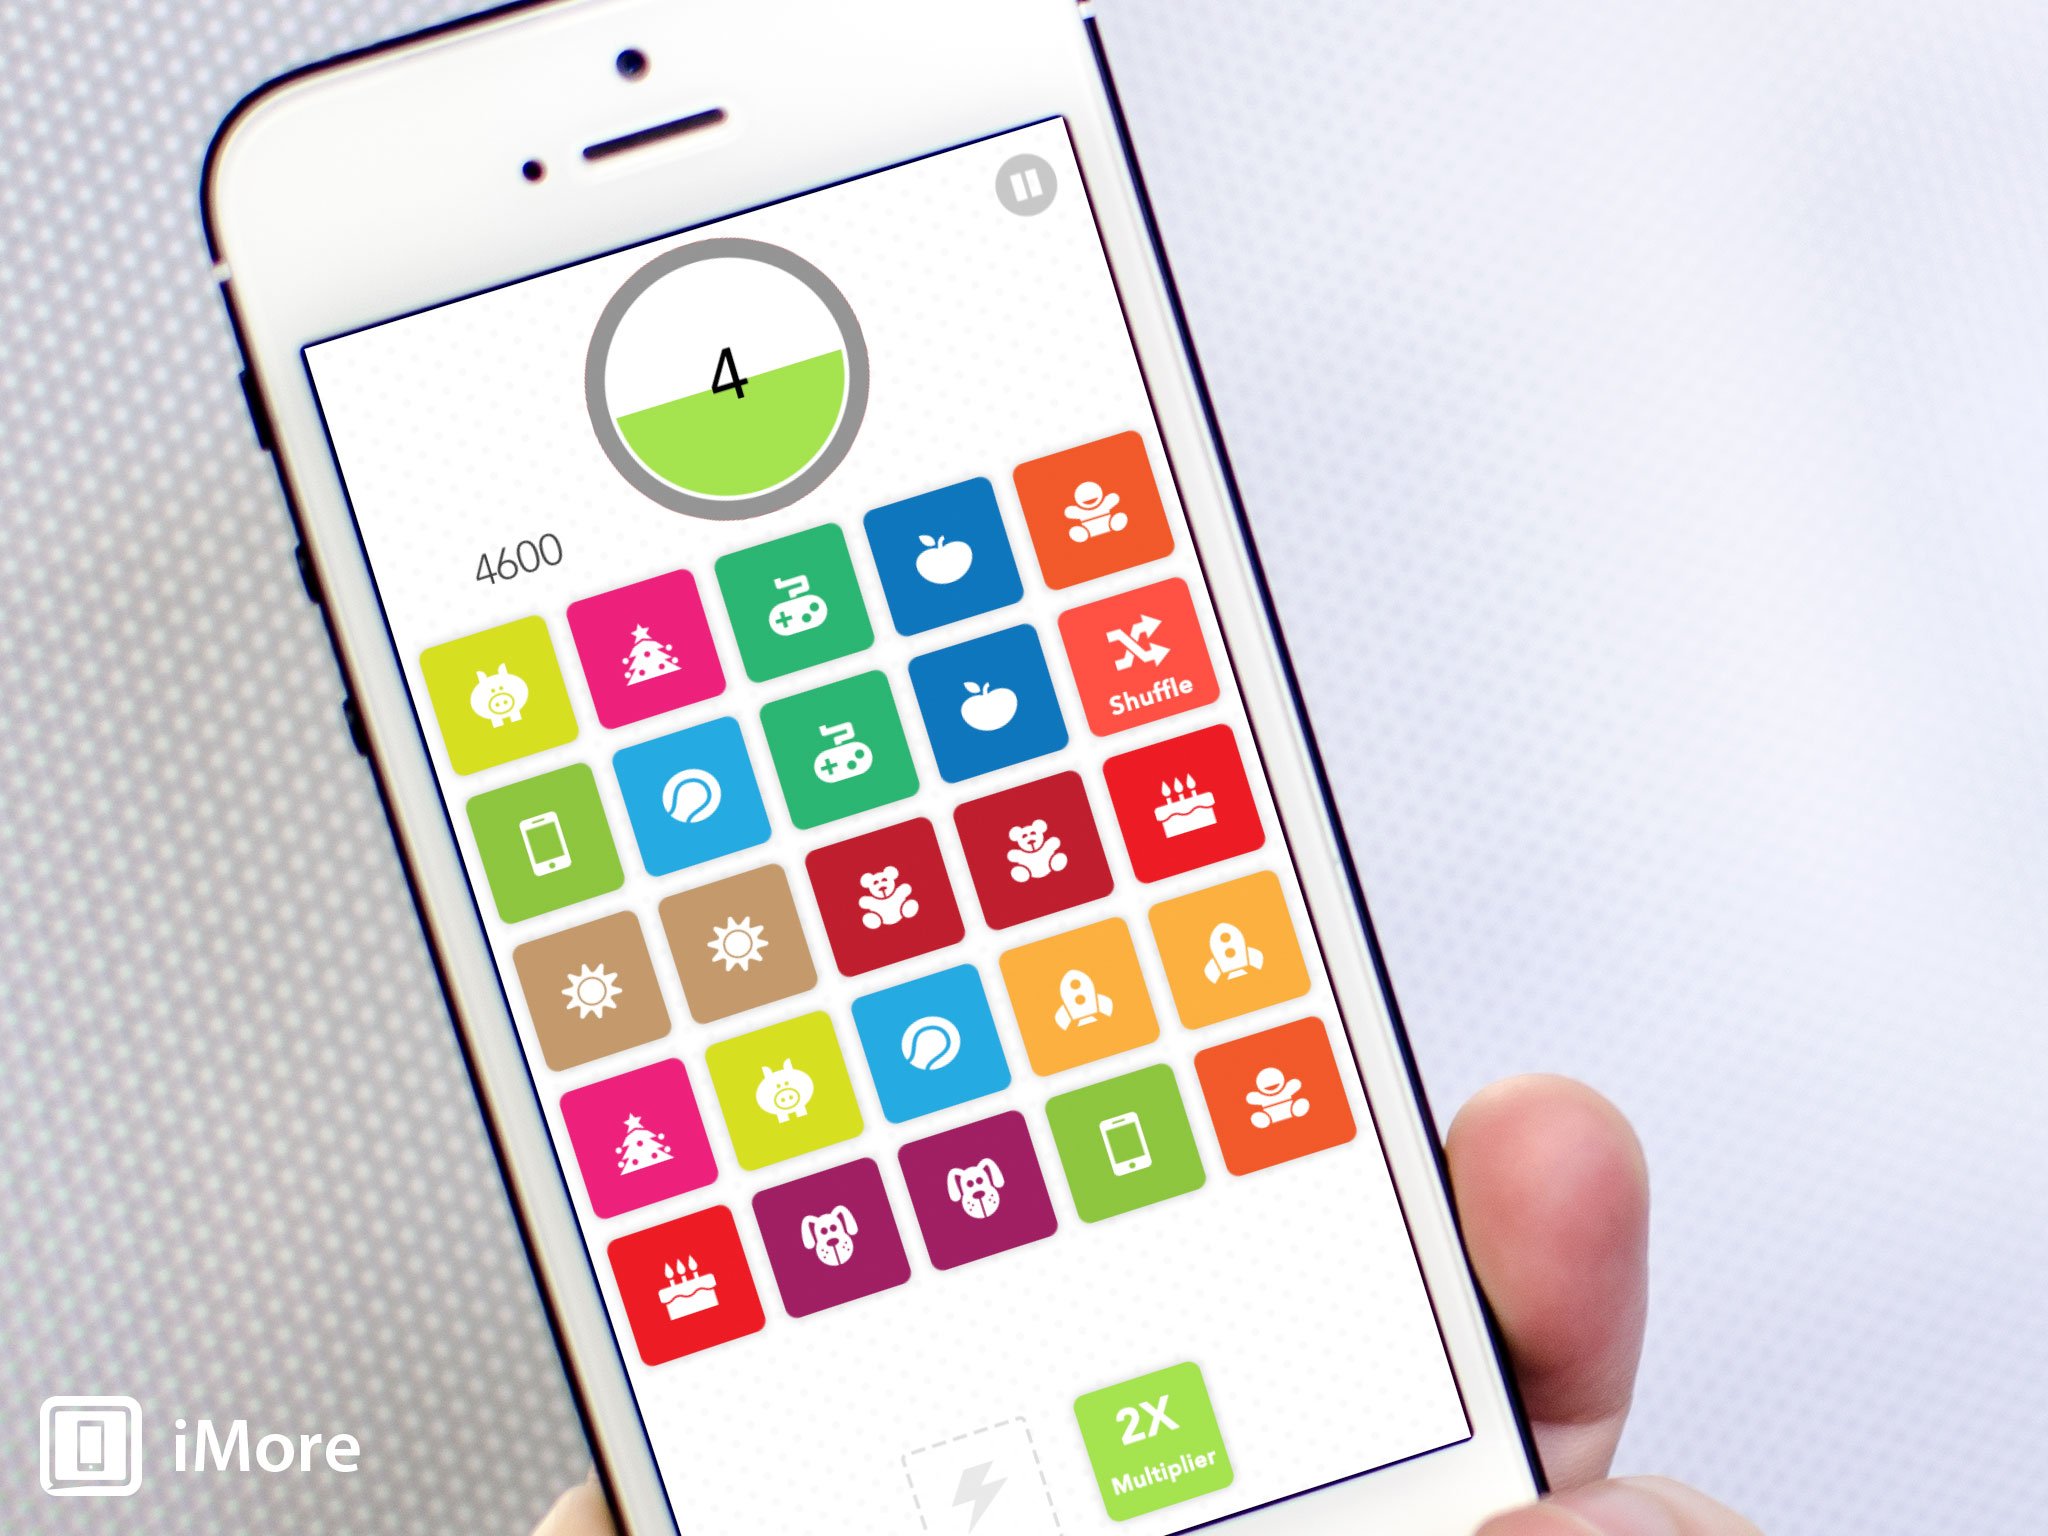 Mind Blitz for iPhone and iPad review: Exercise your muscle memory in this classic memory game with a twist